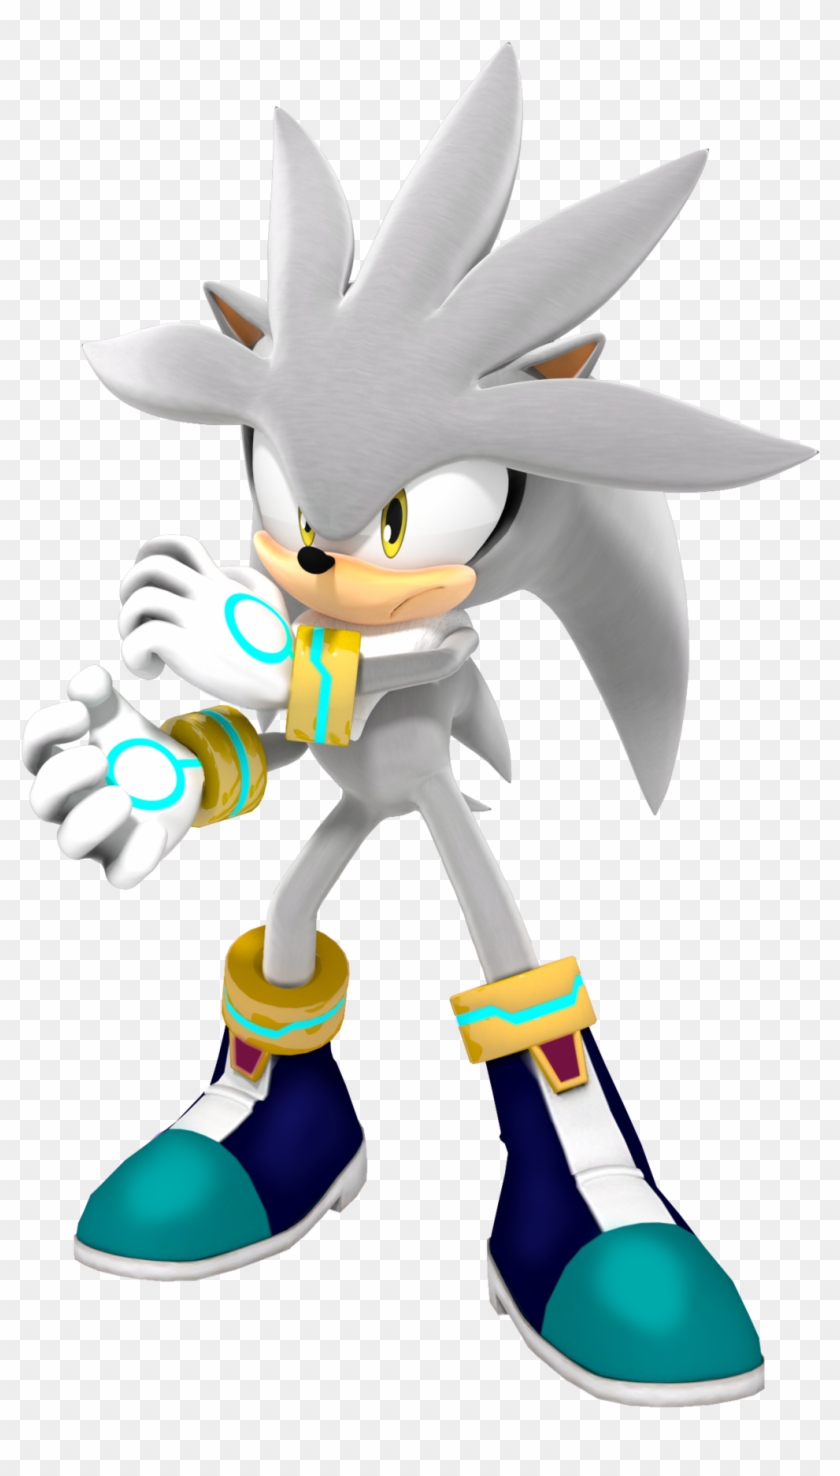 Silver The Hedgehog Png - Silver The Hedgehog Clipart #710576